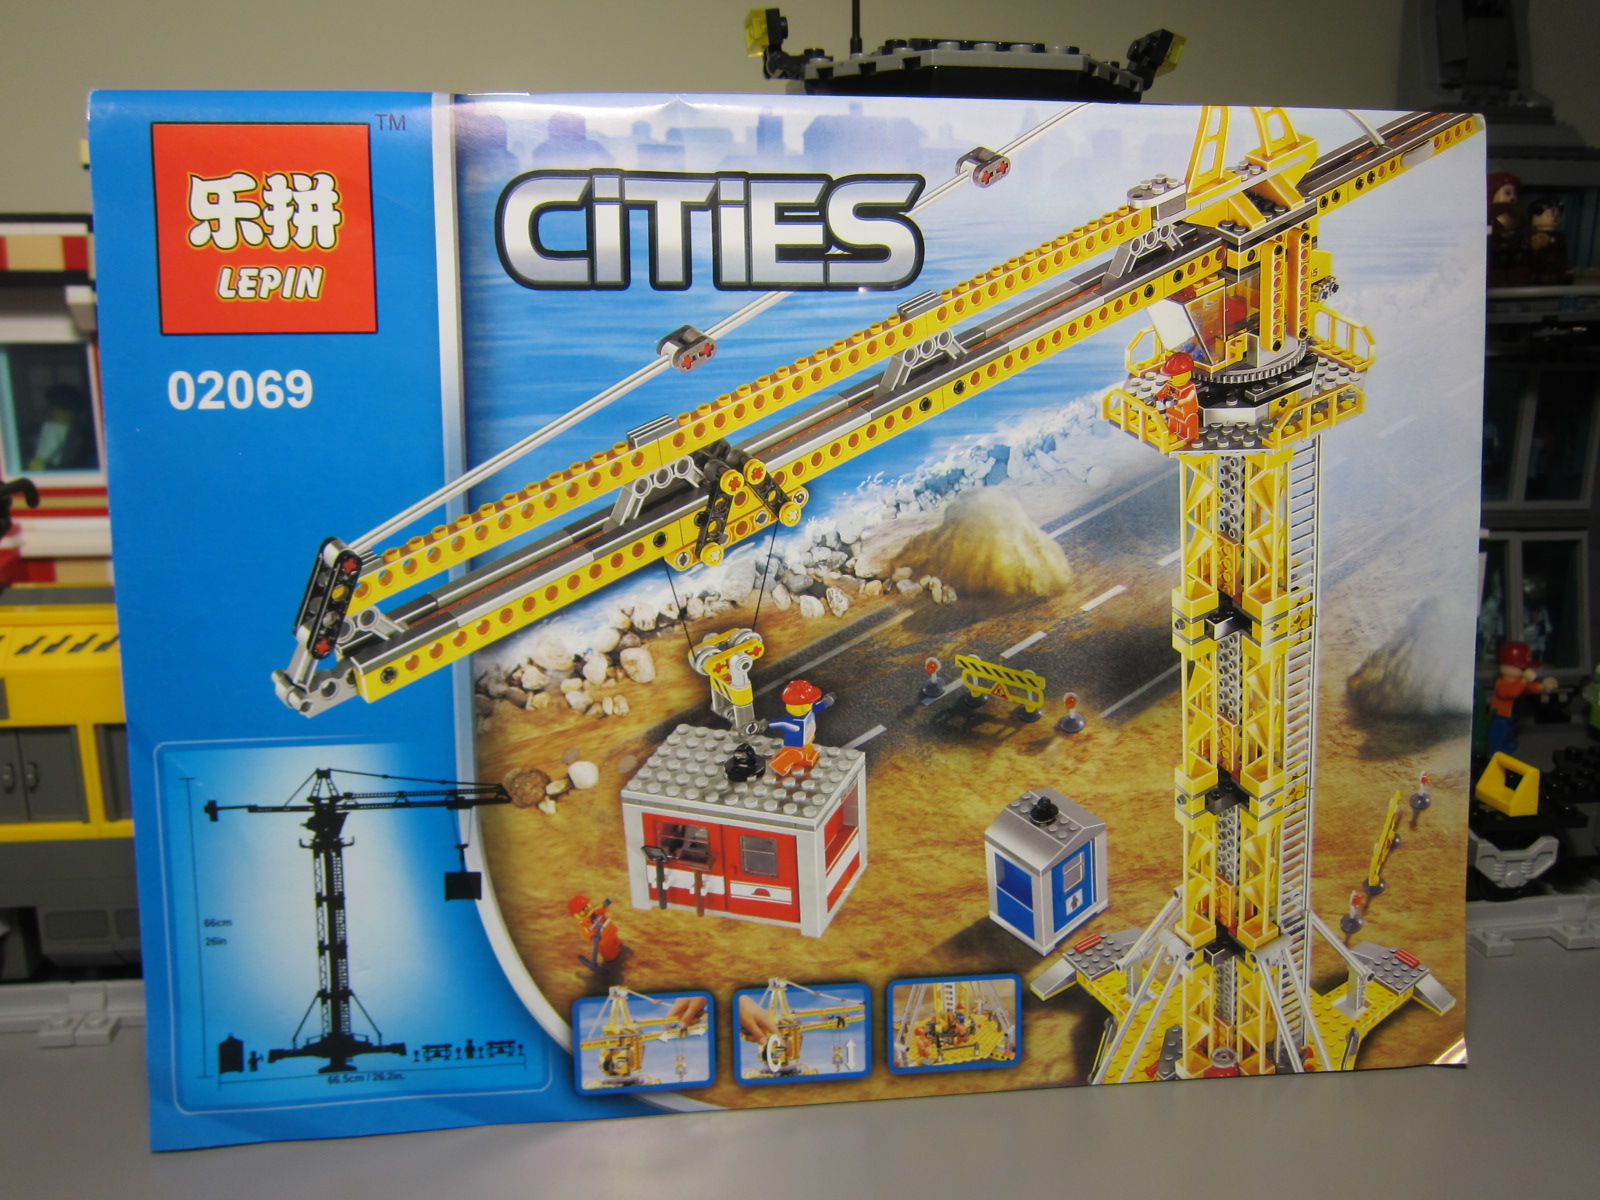 It's Not Lego: Lepin 02069 Not Lego Tower Crane Set Review - Part One